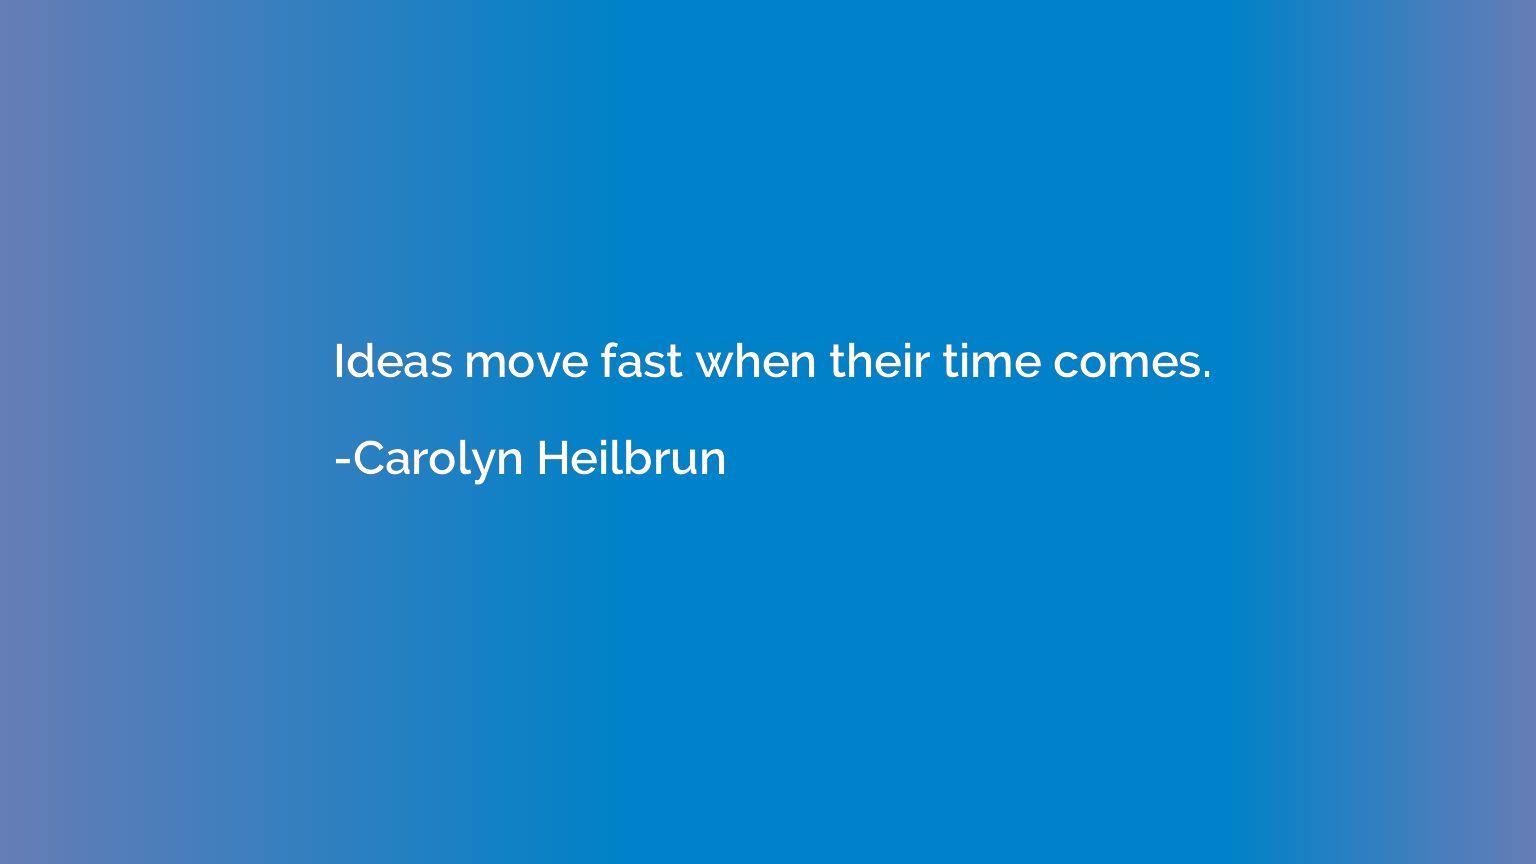 Ideas move fast when their time comes.